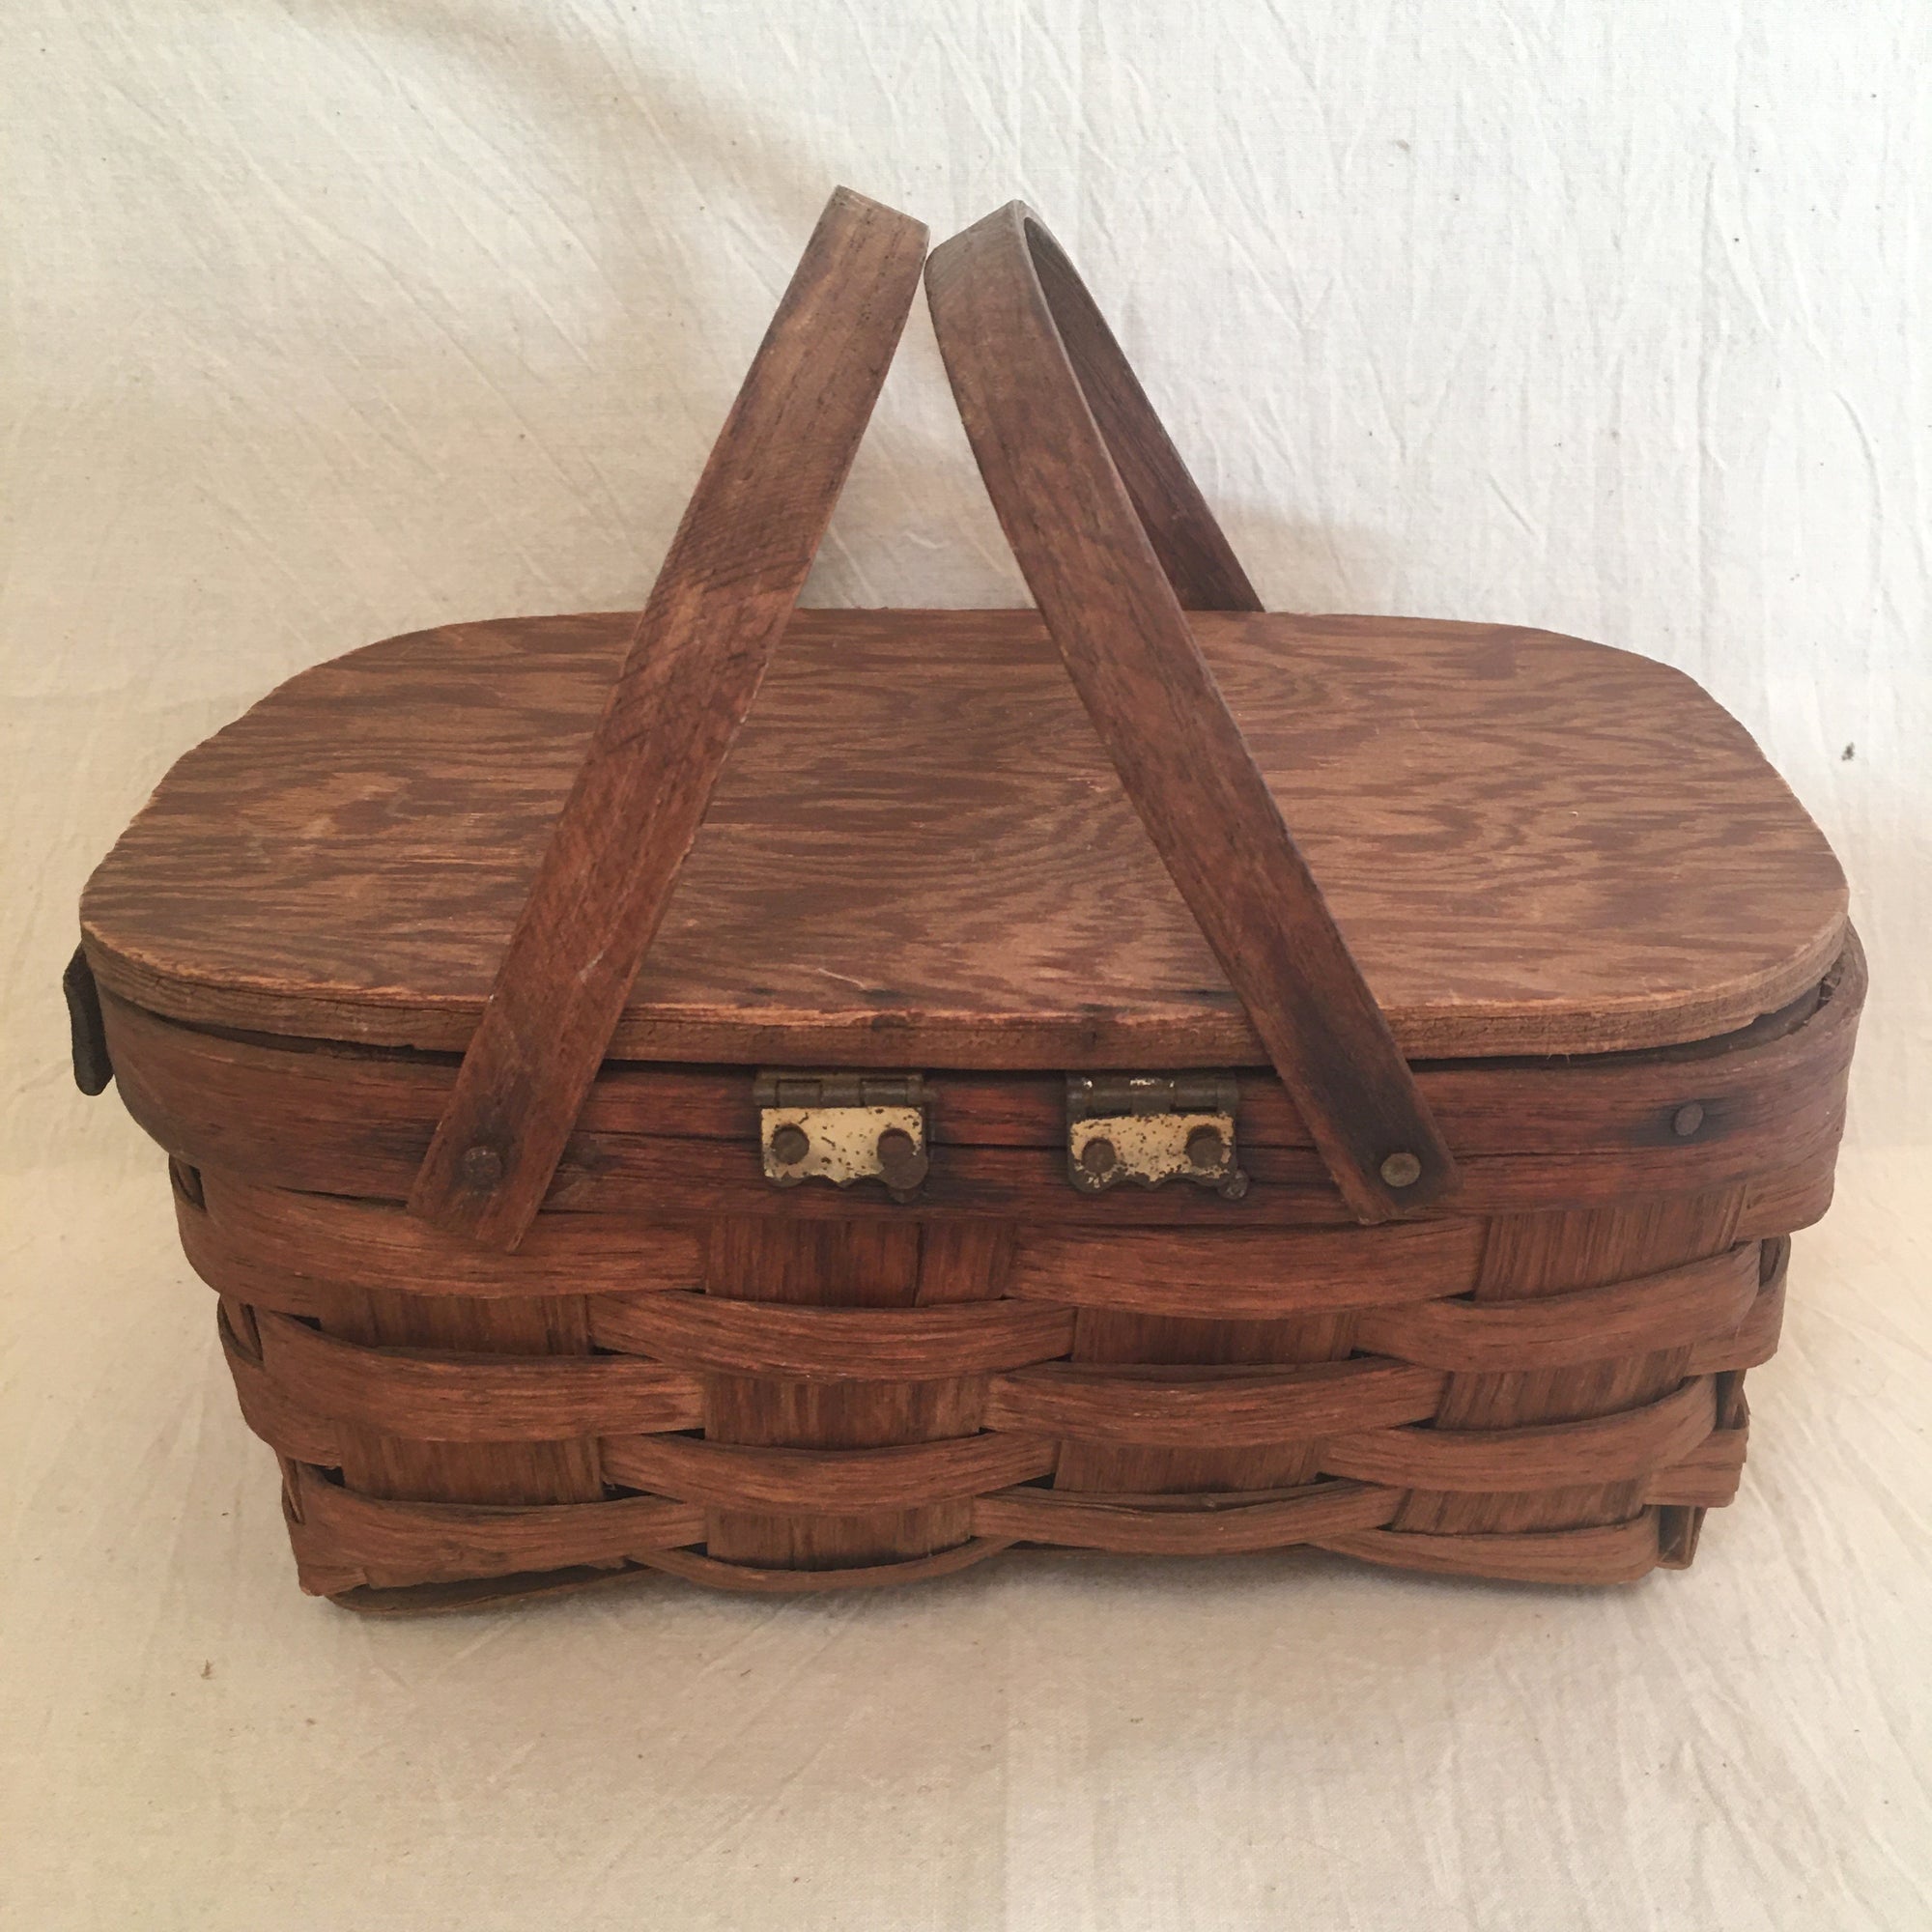 Early 1900’s Child’s Picnic Basket/Lunch Basket (Very Small!)